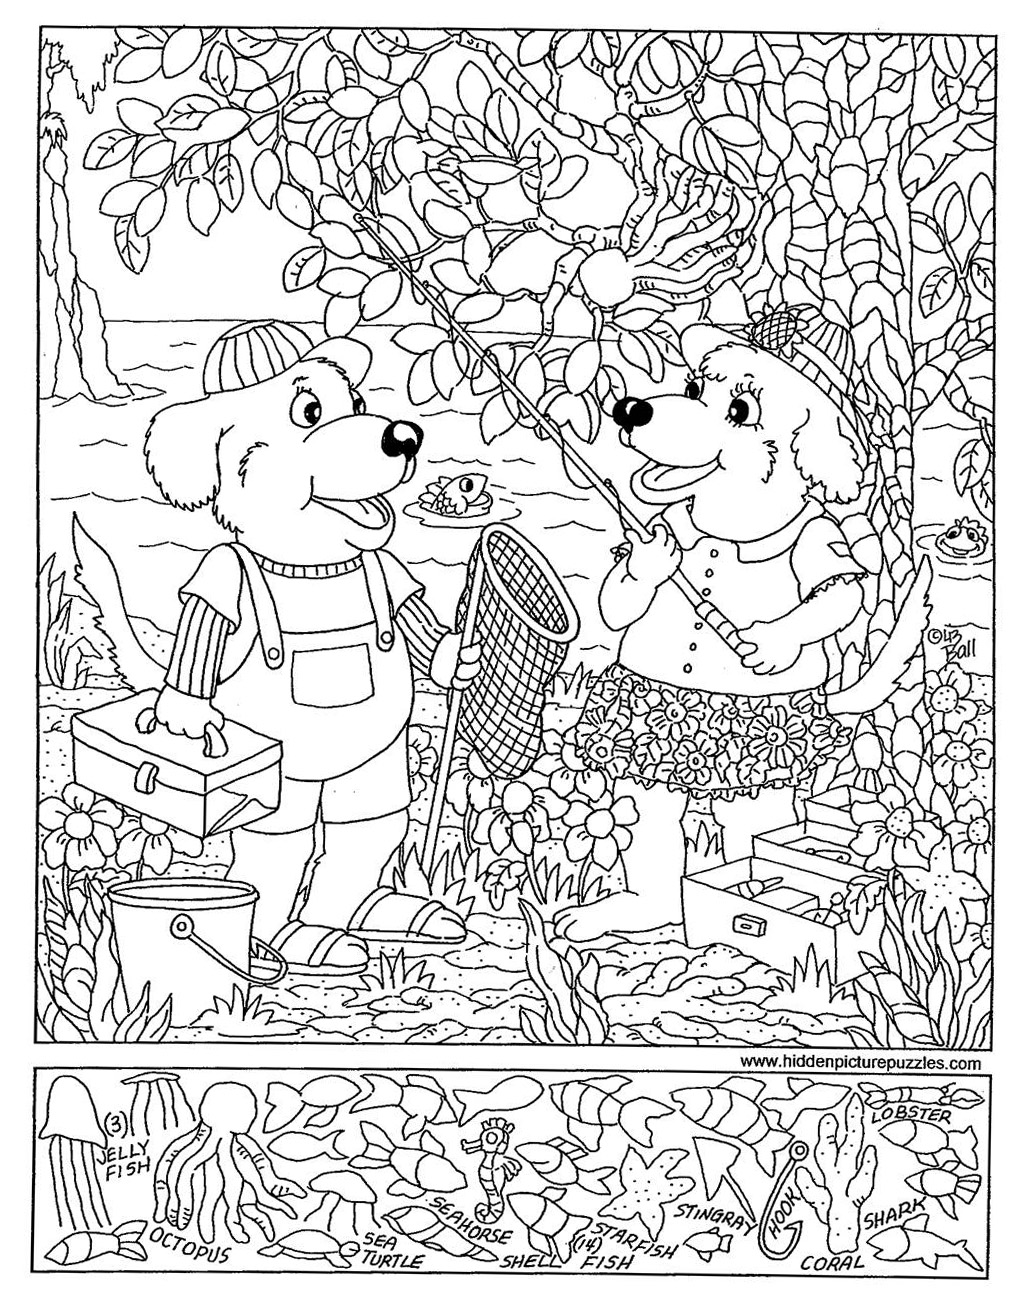 Hidden Pictures Coloring Pages At Getdrawings | Free Download